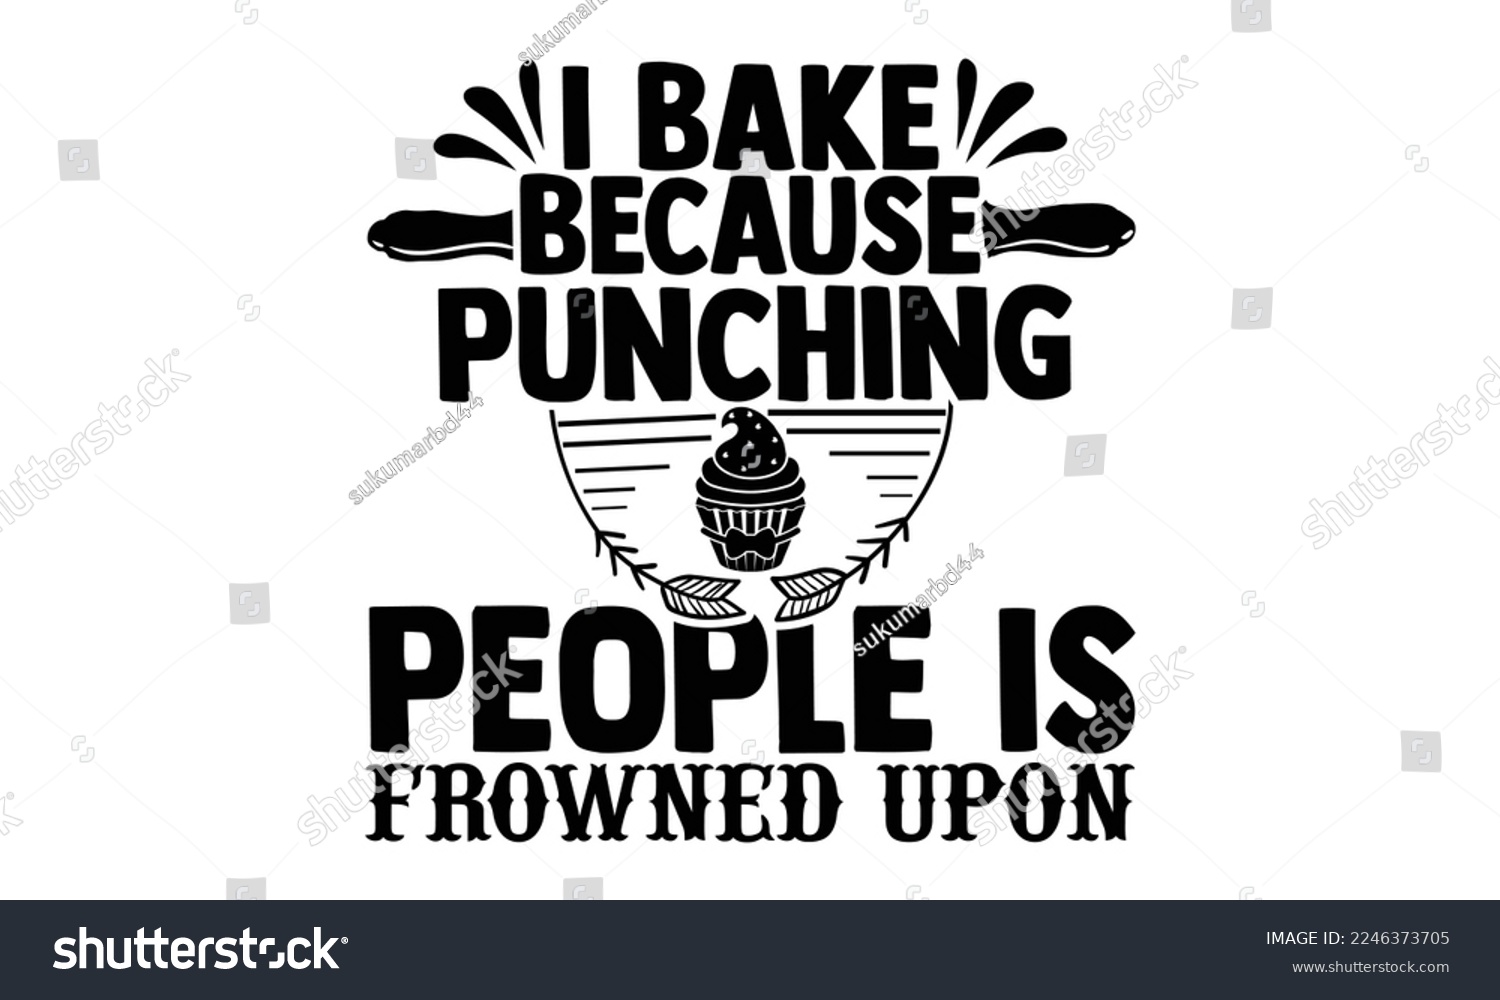 SVG of I Bake Because Punching People Is Frowned Upon - Baking T-shirt Design, Hand Drawn lettering. EPS and SVG Files for Cutting, bag, cups, card, baking quote for print design. Vector illustration. svg